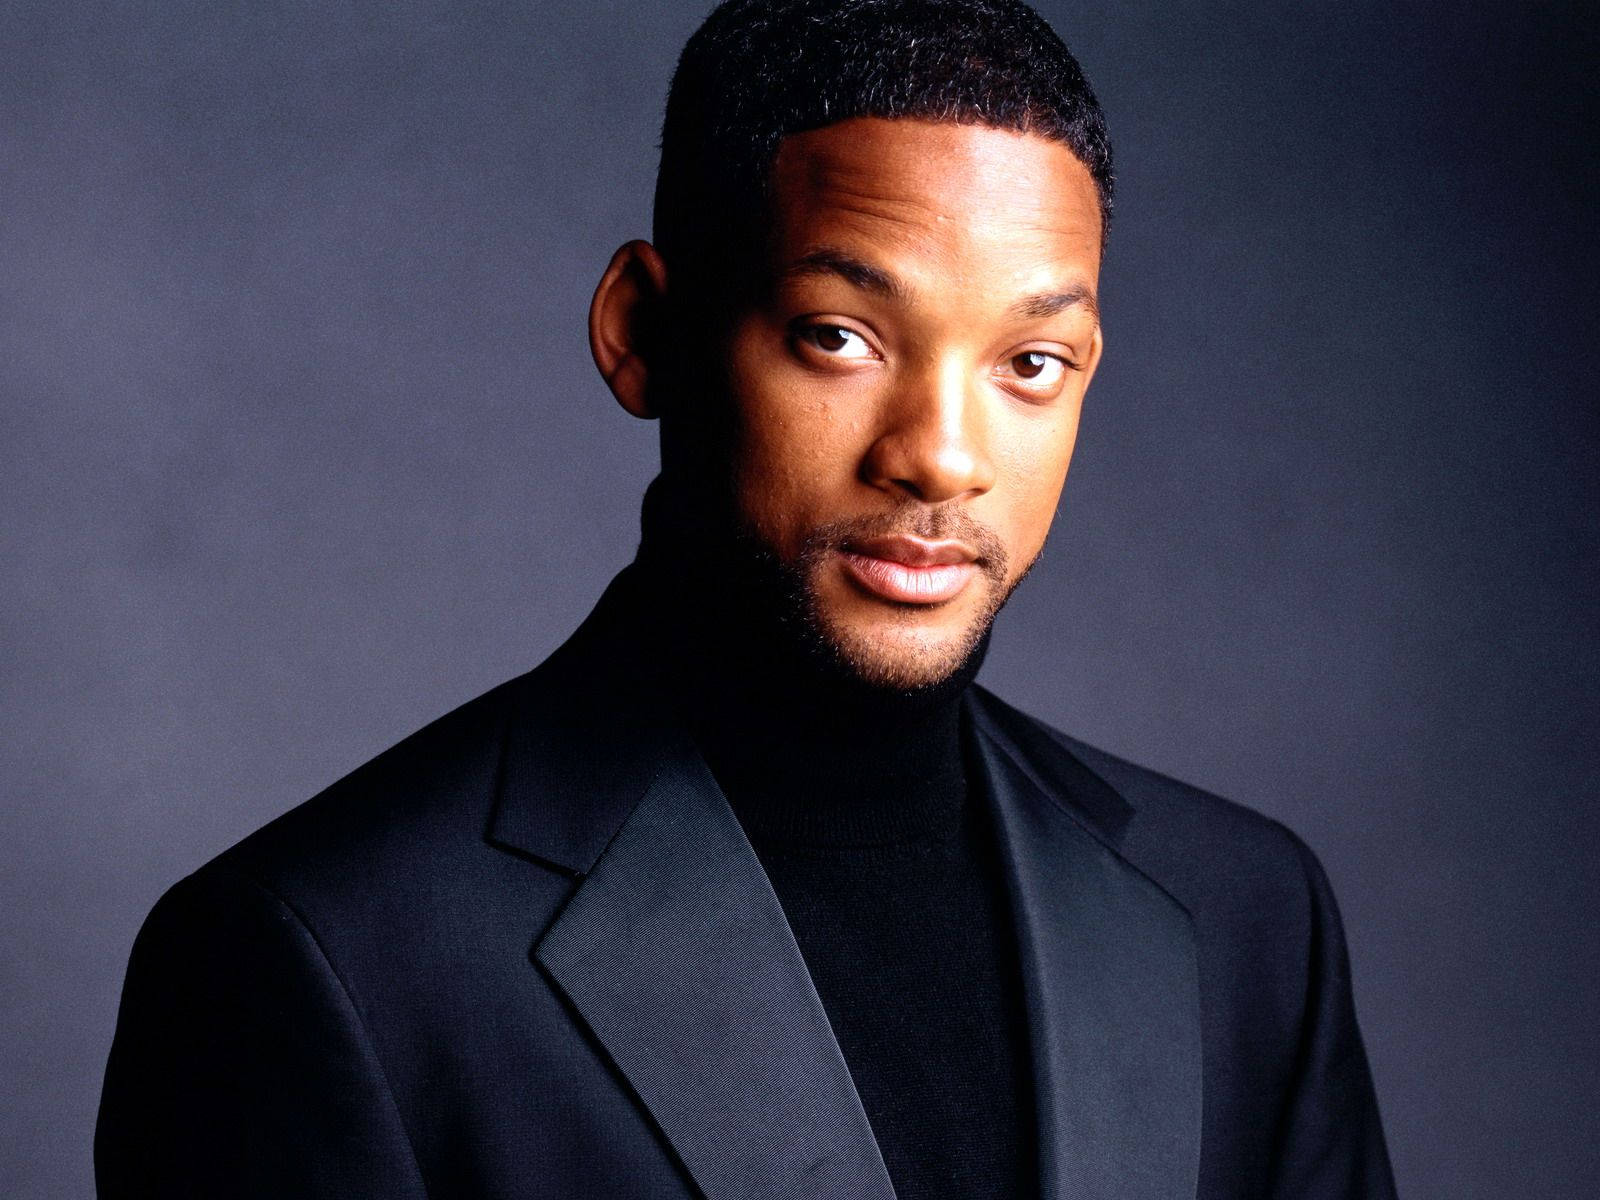 Will Smith In All Black Suit Wallpaper